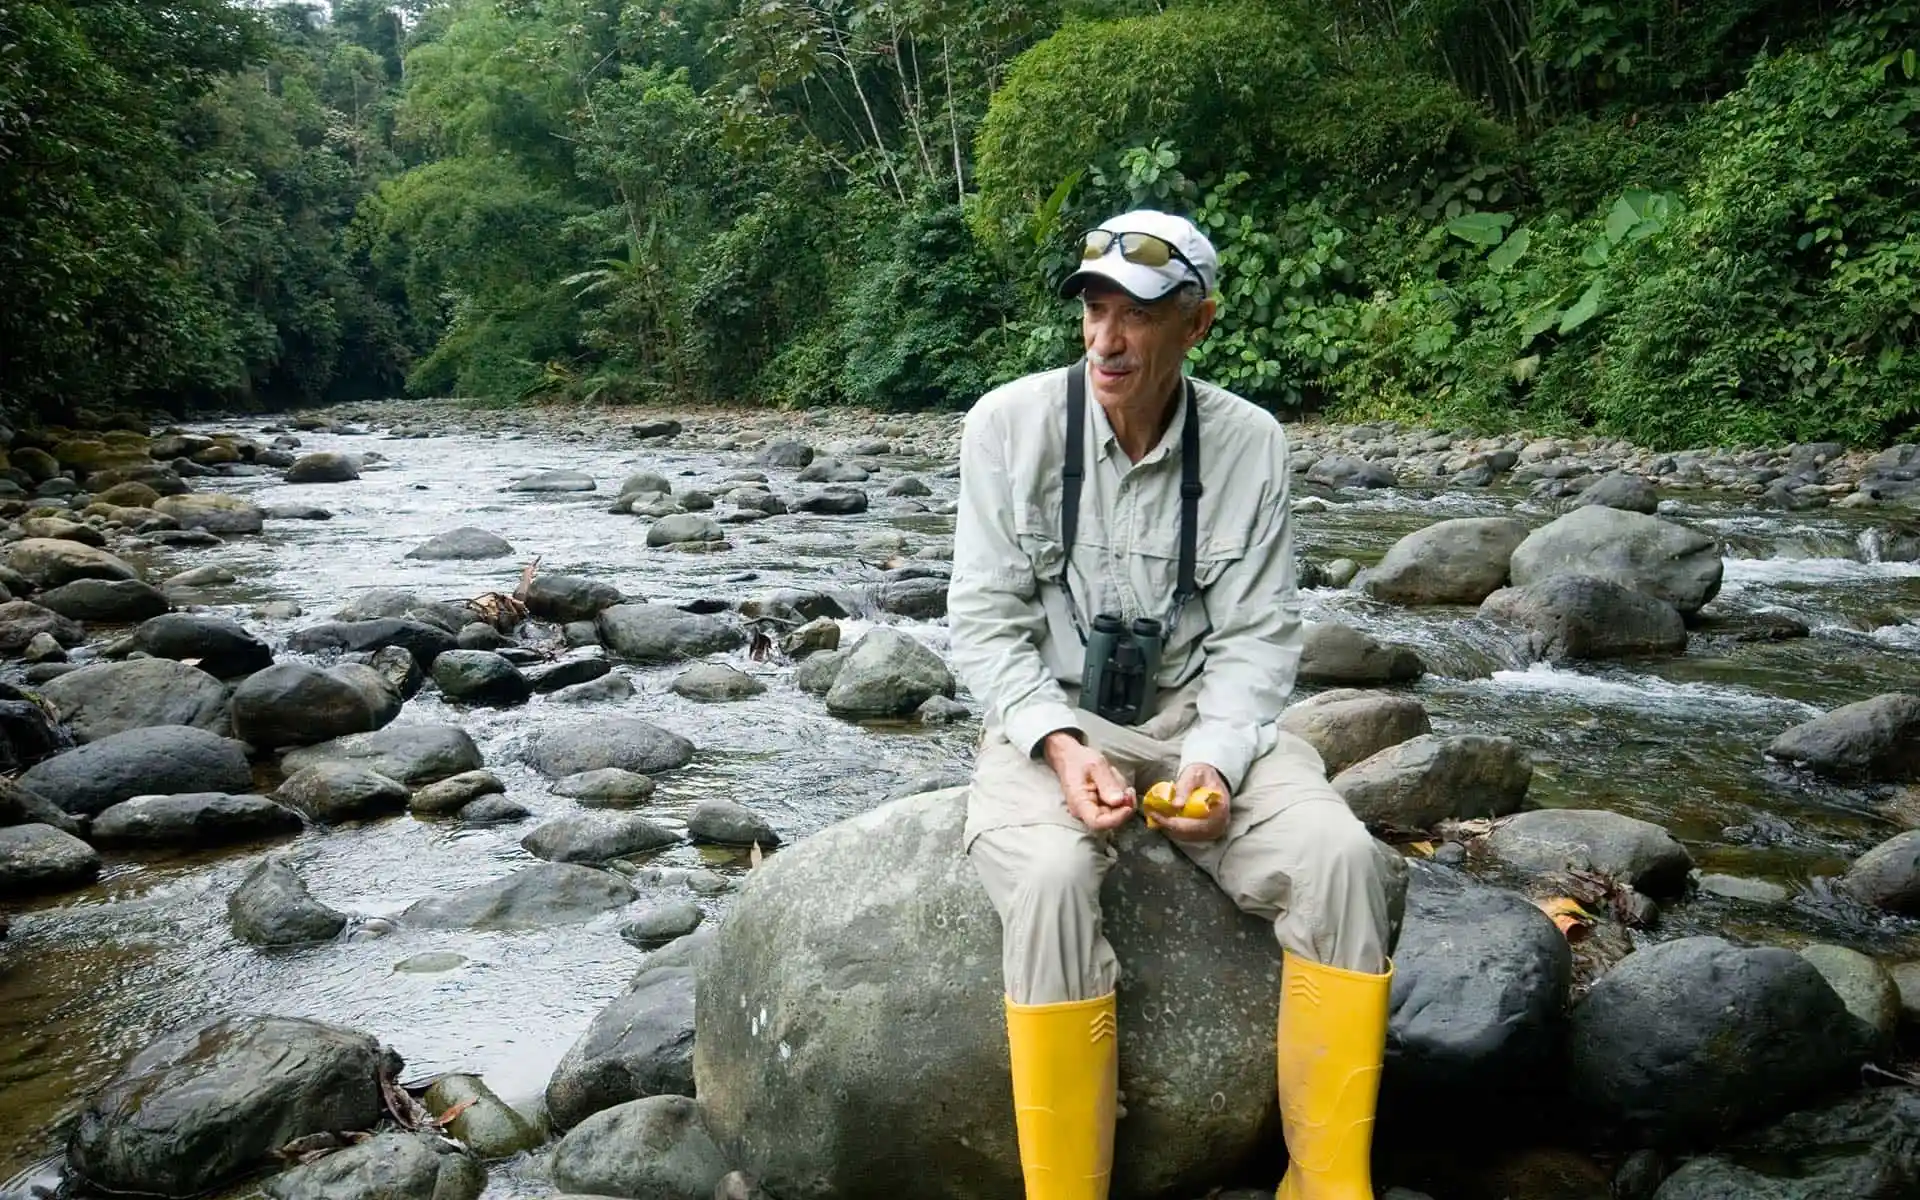 Roque Sevilla in natural setting at Mashpi Lodge during an interview, surrounded by a serene river landscape.